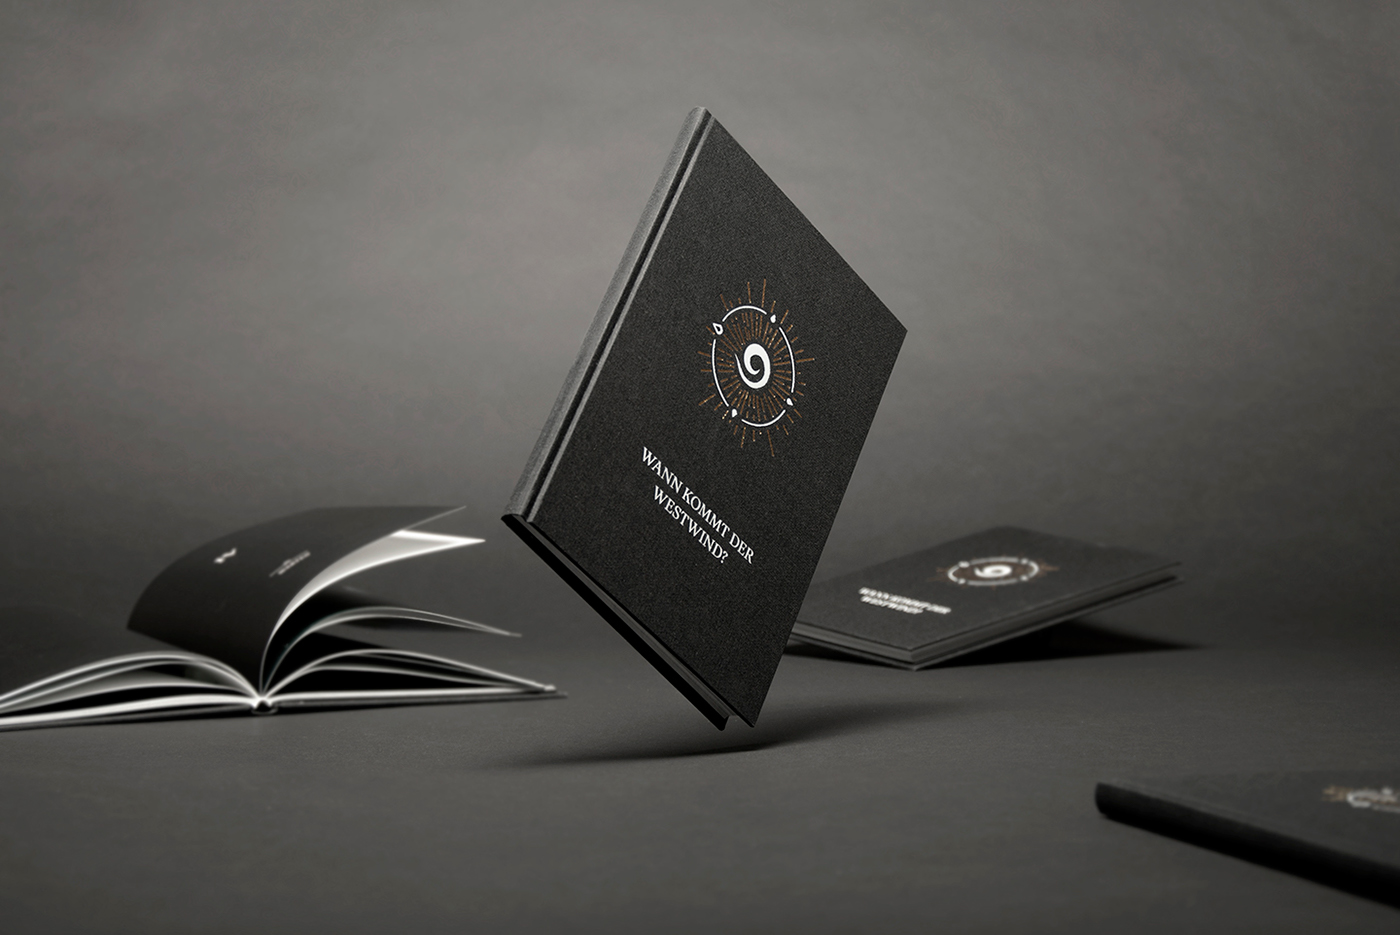 editorial tablet storytelling   innovation final project thesis interactive book book and tablet interactive storytelling master's thesis book with tablet book flat illustration